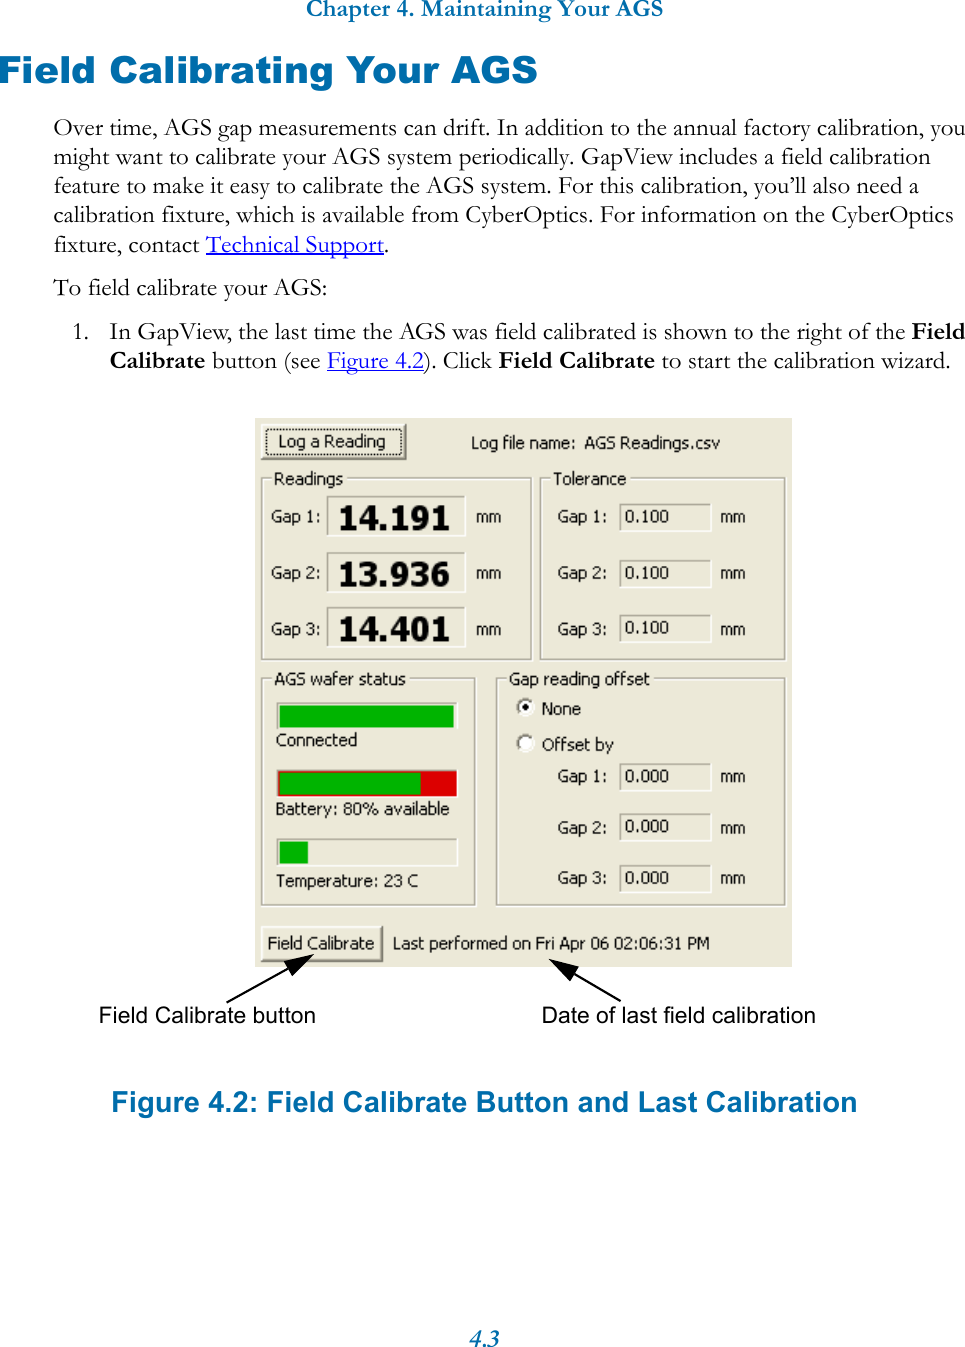 Chapter 4. Maintaining Your AGS4.3Field Calibrating Your AGSOver time, AGS gap measurements can drift. In addition to the annual factory calibration, you might want to calibrate your AGS system periodically. GapView includes a field calibration feature to make it easy to calibrate the AGS system. For this calibration, you’ll also need a calibration fixture, which is available from CyberOptics. For information on the CyberOptics fixture, contact Technical Support.To field calibrate your AGS:1. In GapView, the last time the AGS was field calibrated is shown to the right of the Field Calibrate button (see Figure 4.2). Click Field Calibrate to start the calibration wizard. Figure 4.2: Field Calibrate Button and Last CalibrationDate of last field calibrationField Calibrate button